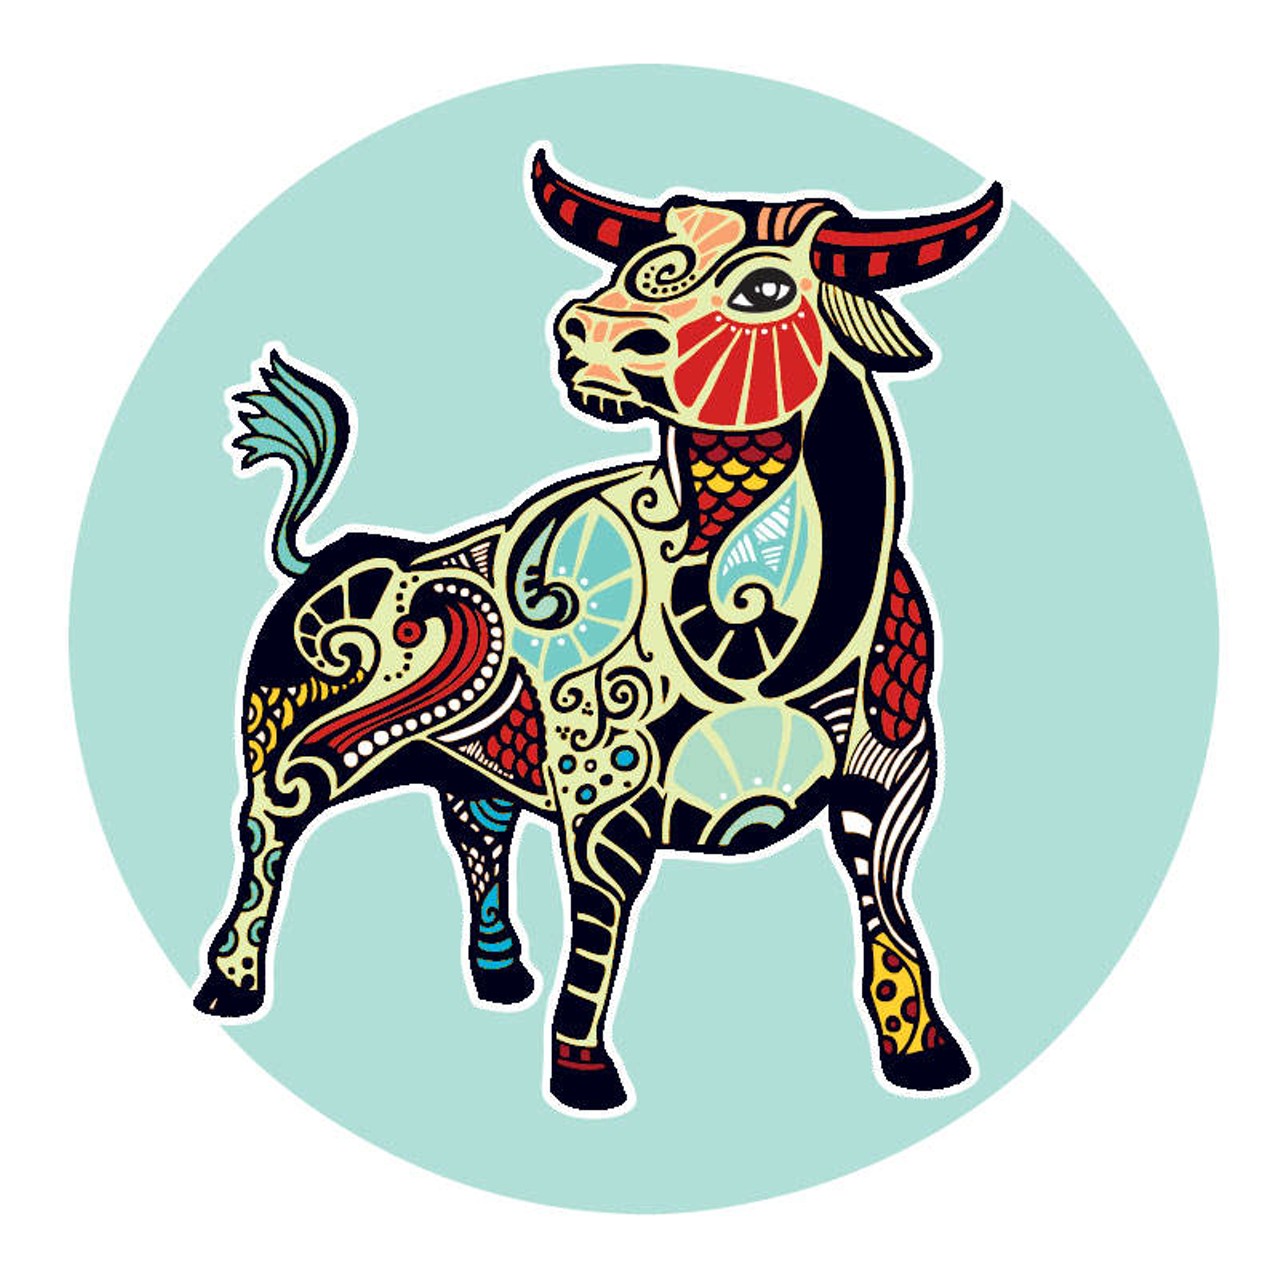 TAURUS (April 21 -May 20): 
Between a rock and a hard place there is no choice but to become like water. Too many external influences have too much to say about who you need to be. Deep down inside the part of you who knows who you are is waiting patiently for your fears to recede, far enough for you to swim into a new definition of yourself. So much of this is imaginary. The laws of physics tell us that higher frequencies displace lower frequencies. As you come face to face with what seems to matter more than anything, know that the forces that assail you have no power over you.